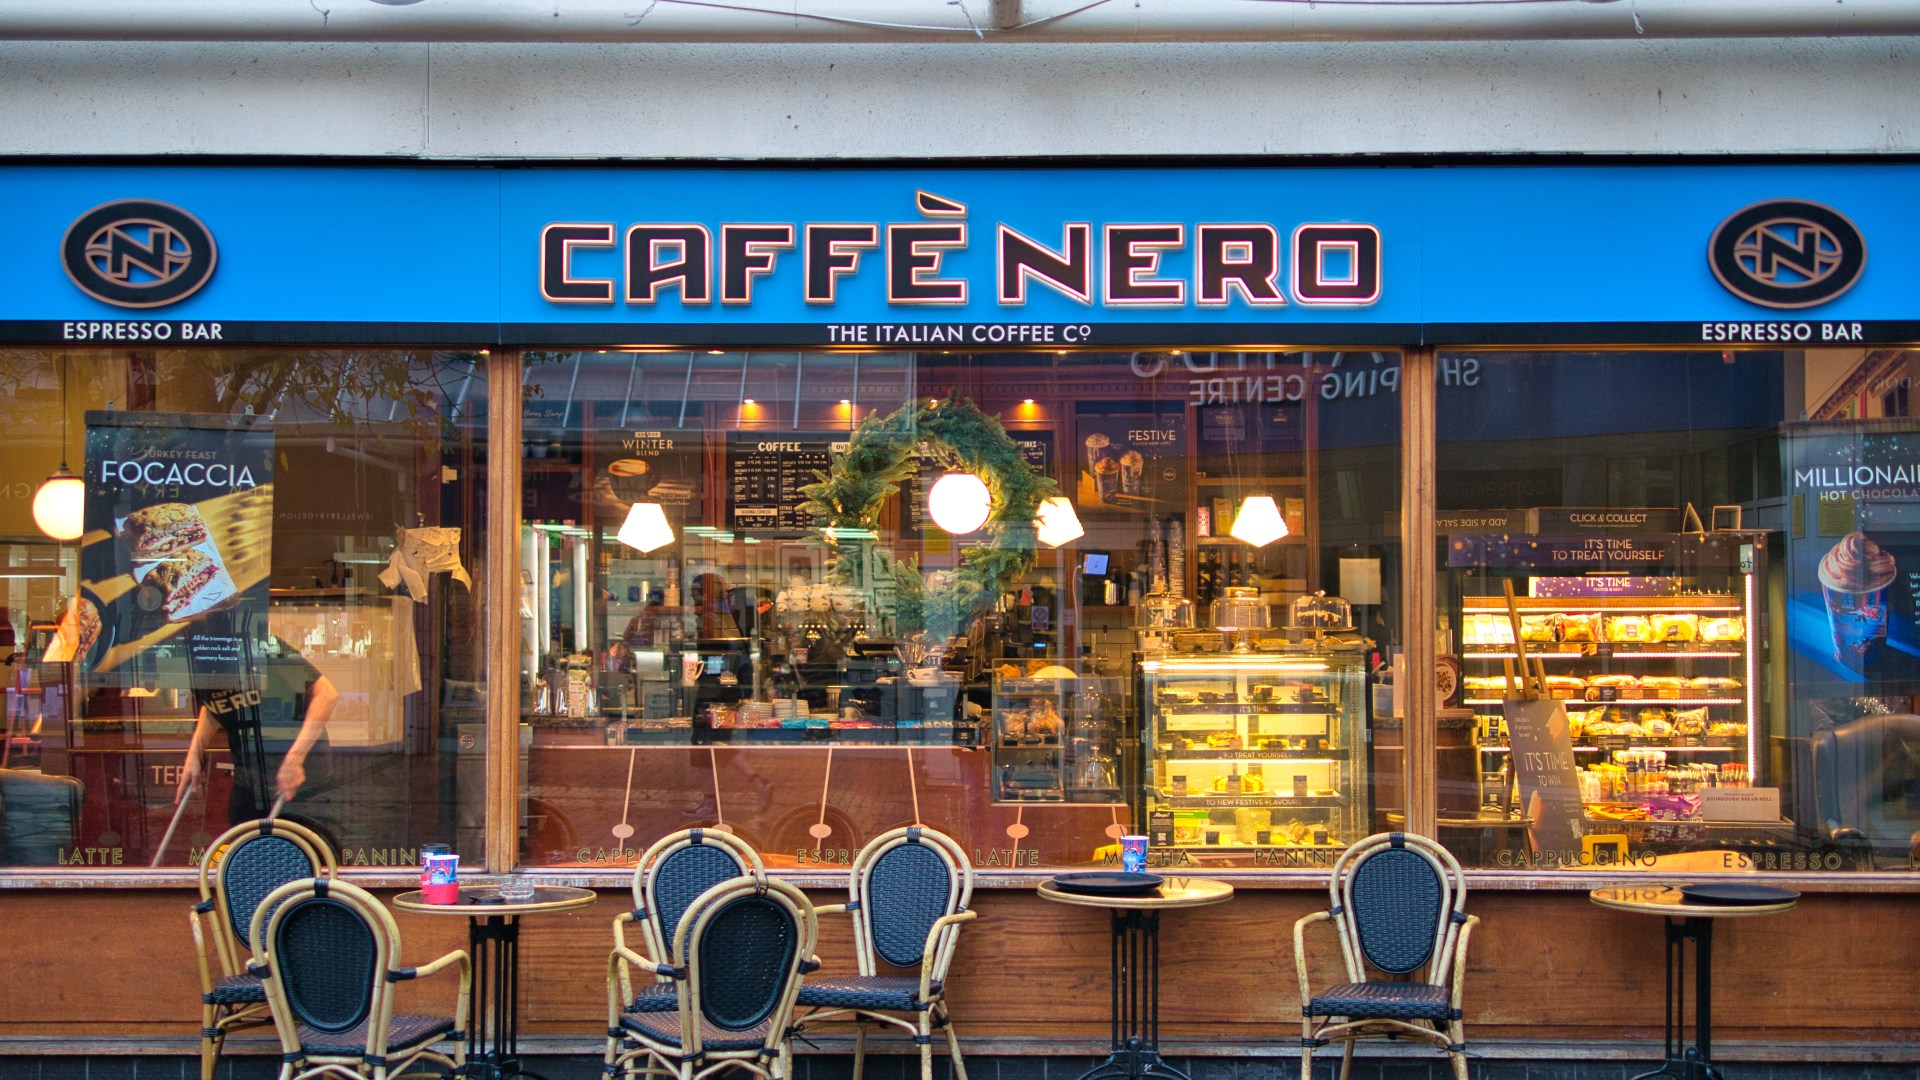 ‘I got mine’ say customers at Britains second-largest energy firm after realising they can claim Caffe Nero for FREE [Video]